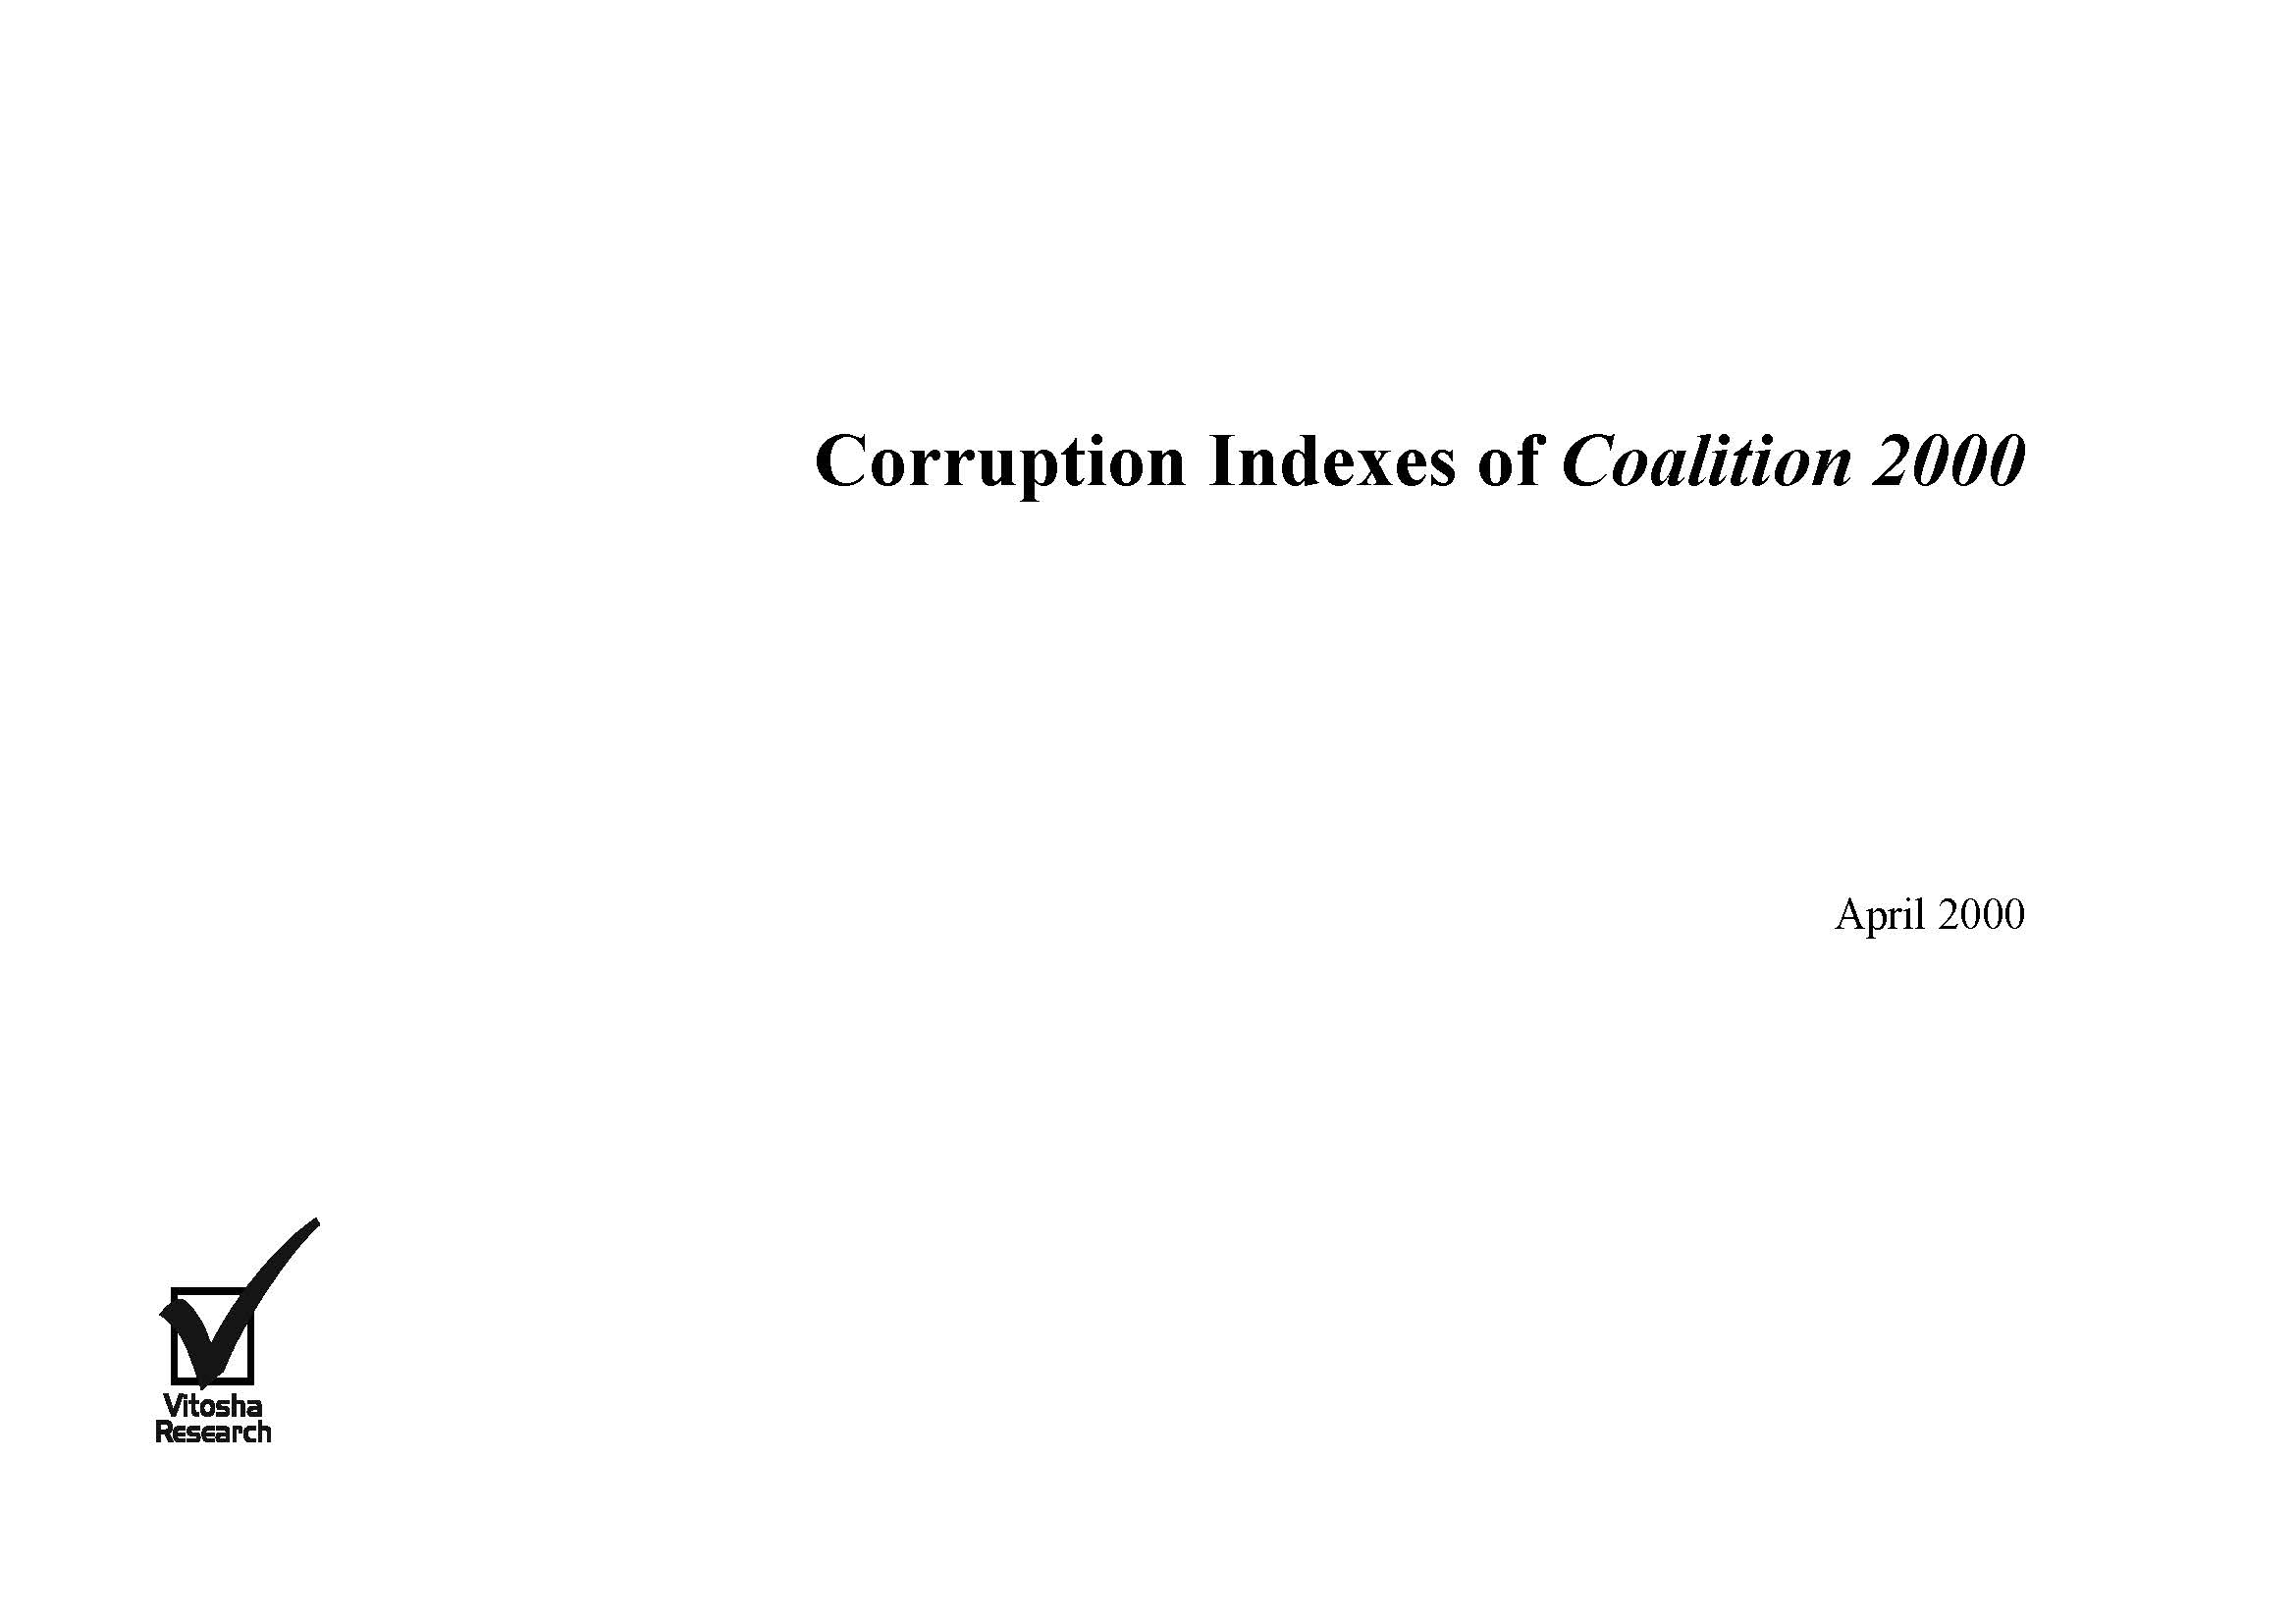 Corruption Indexes of Coalition 2000, April 2000